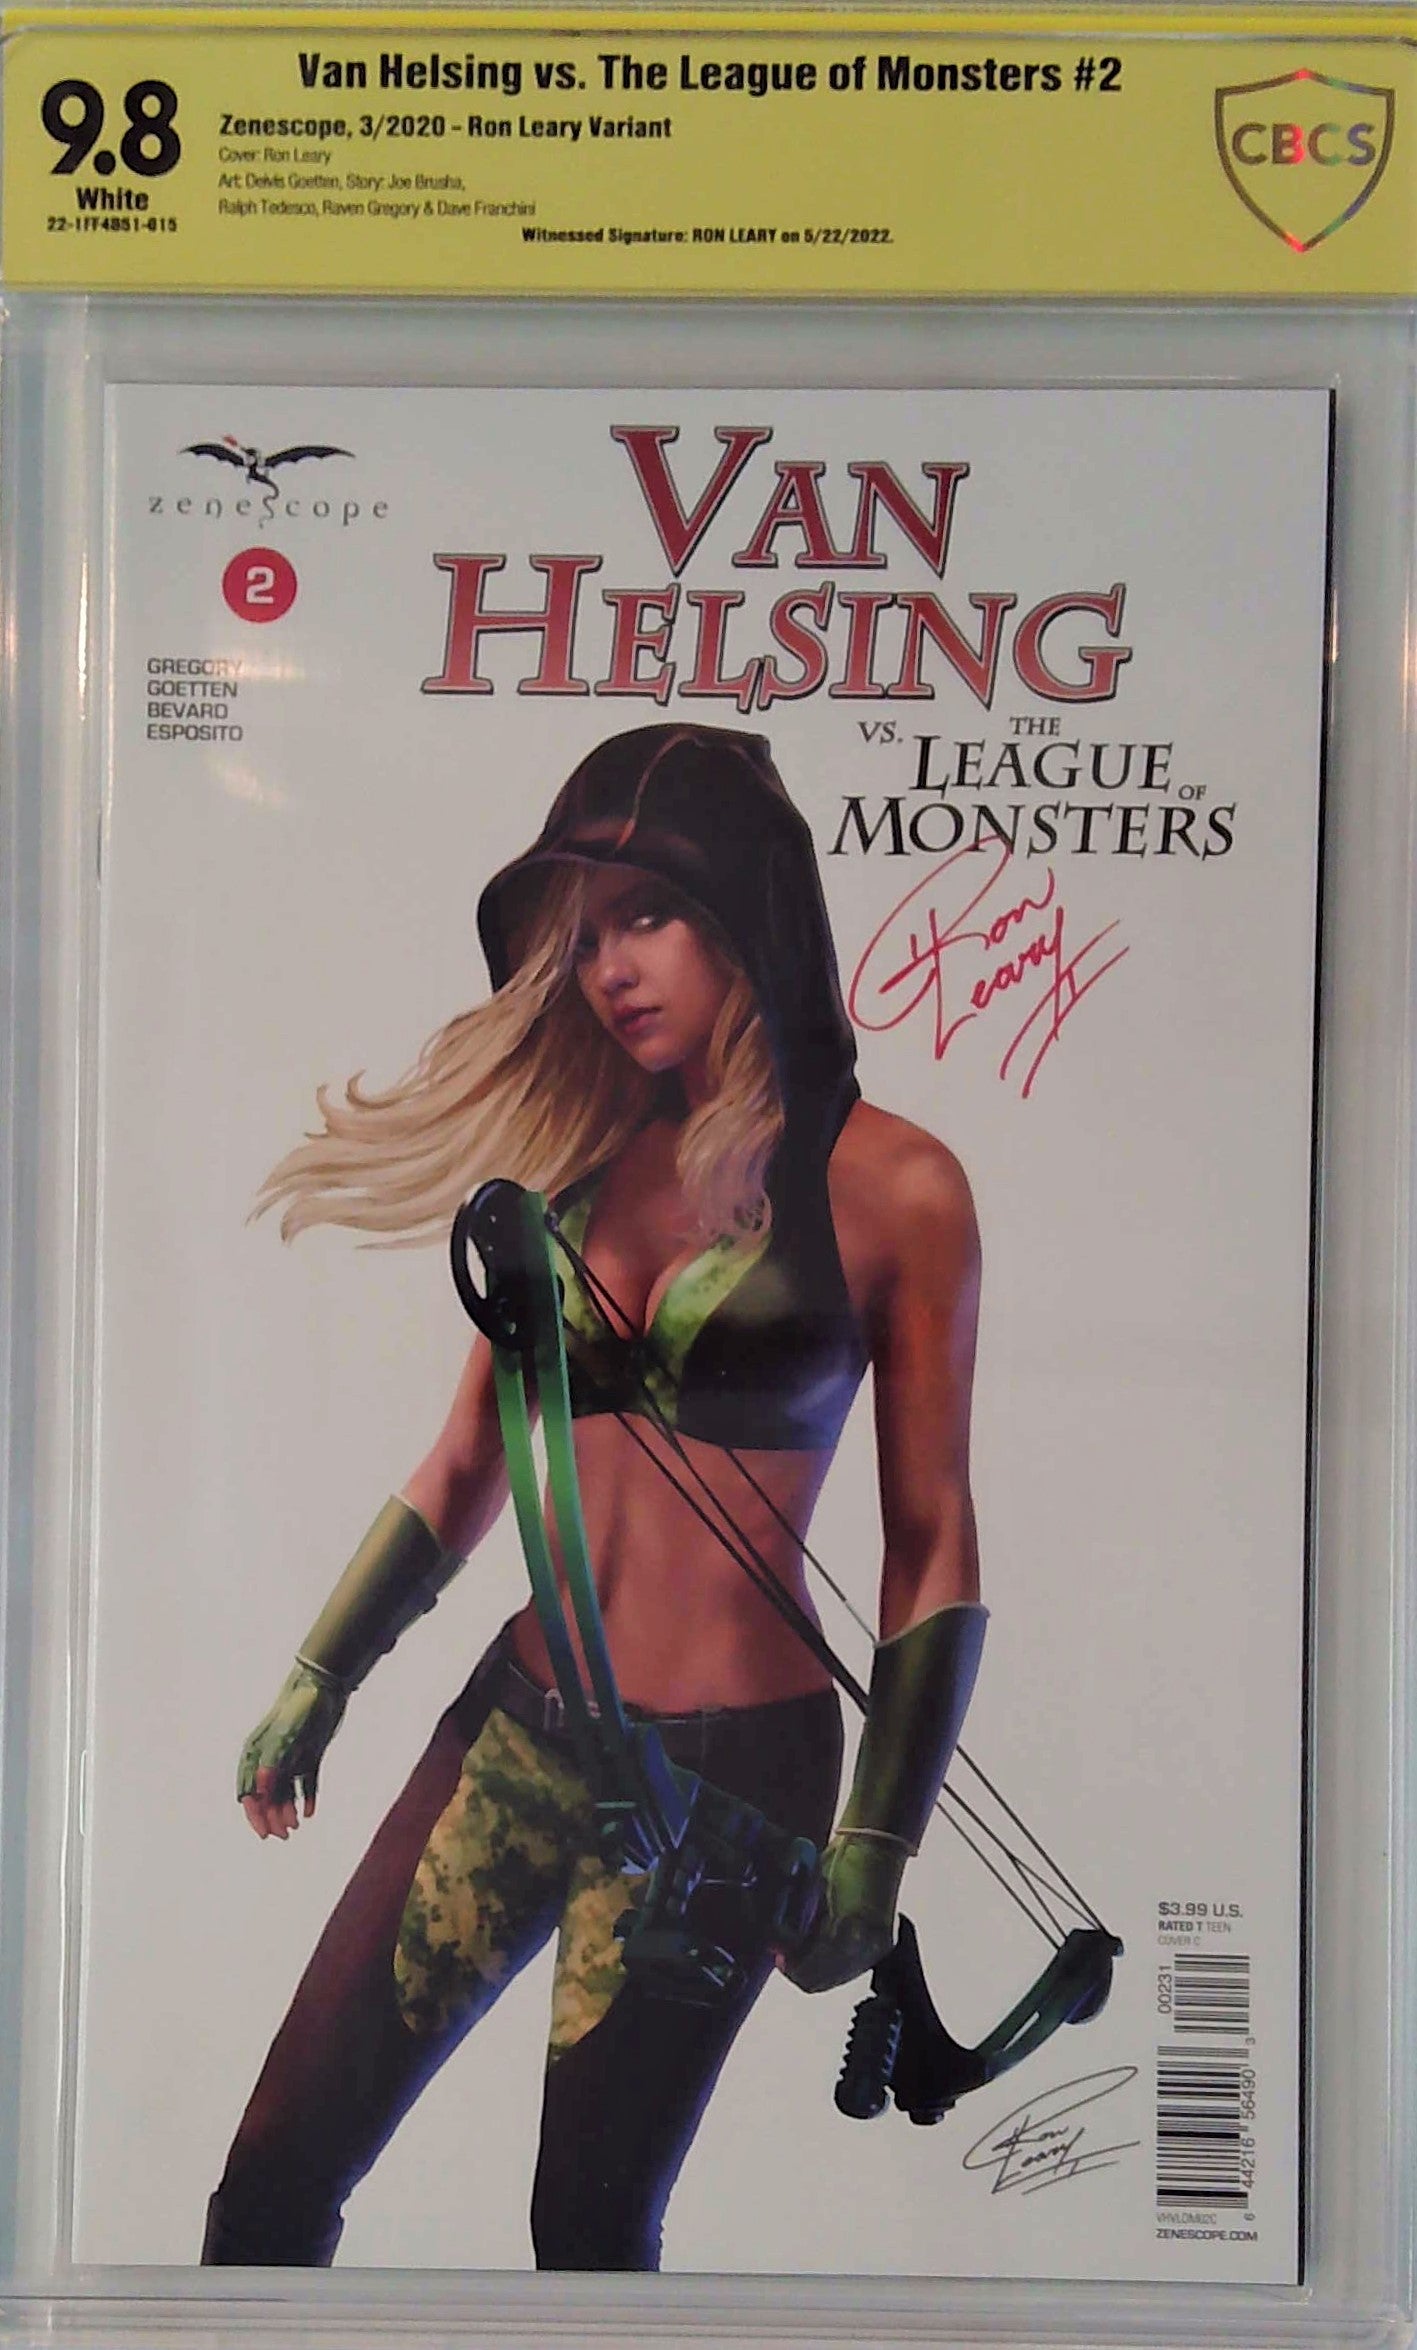 Van Helsing vs. The League of Monsters #2 Ron Leary Variant CBCS 9.8 Yellow Label